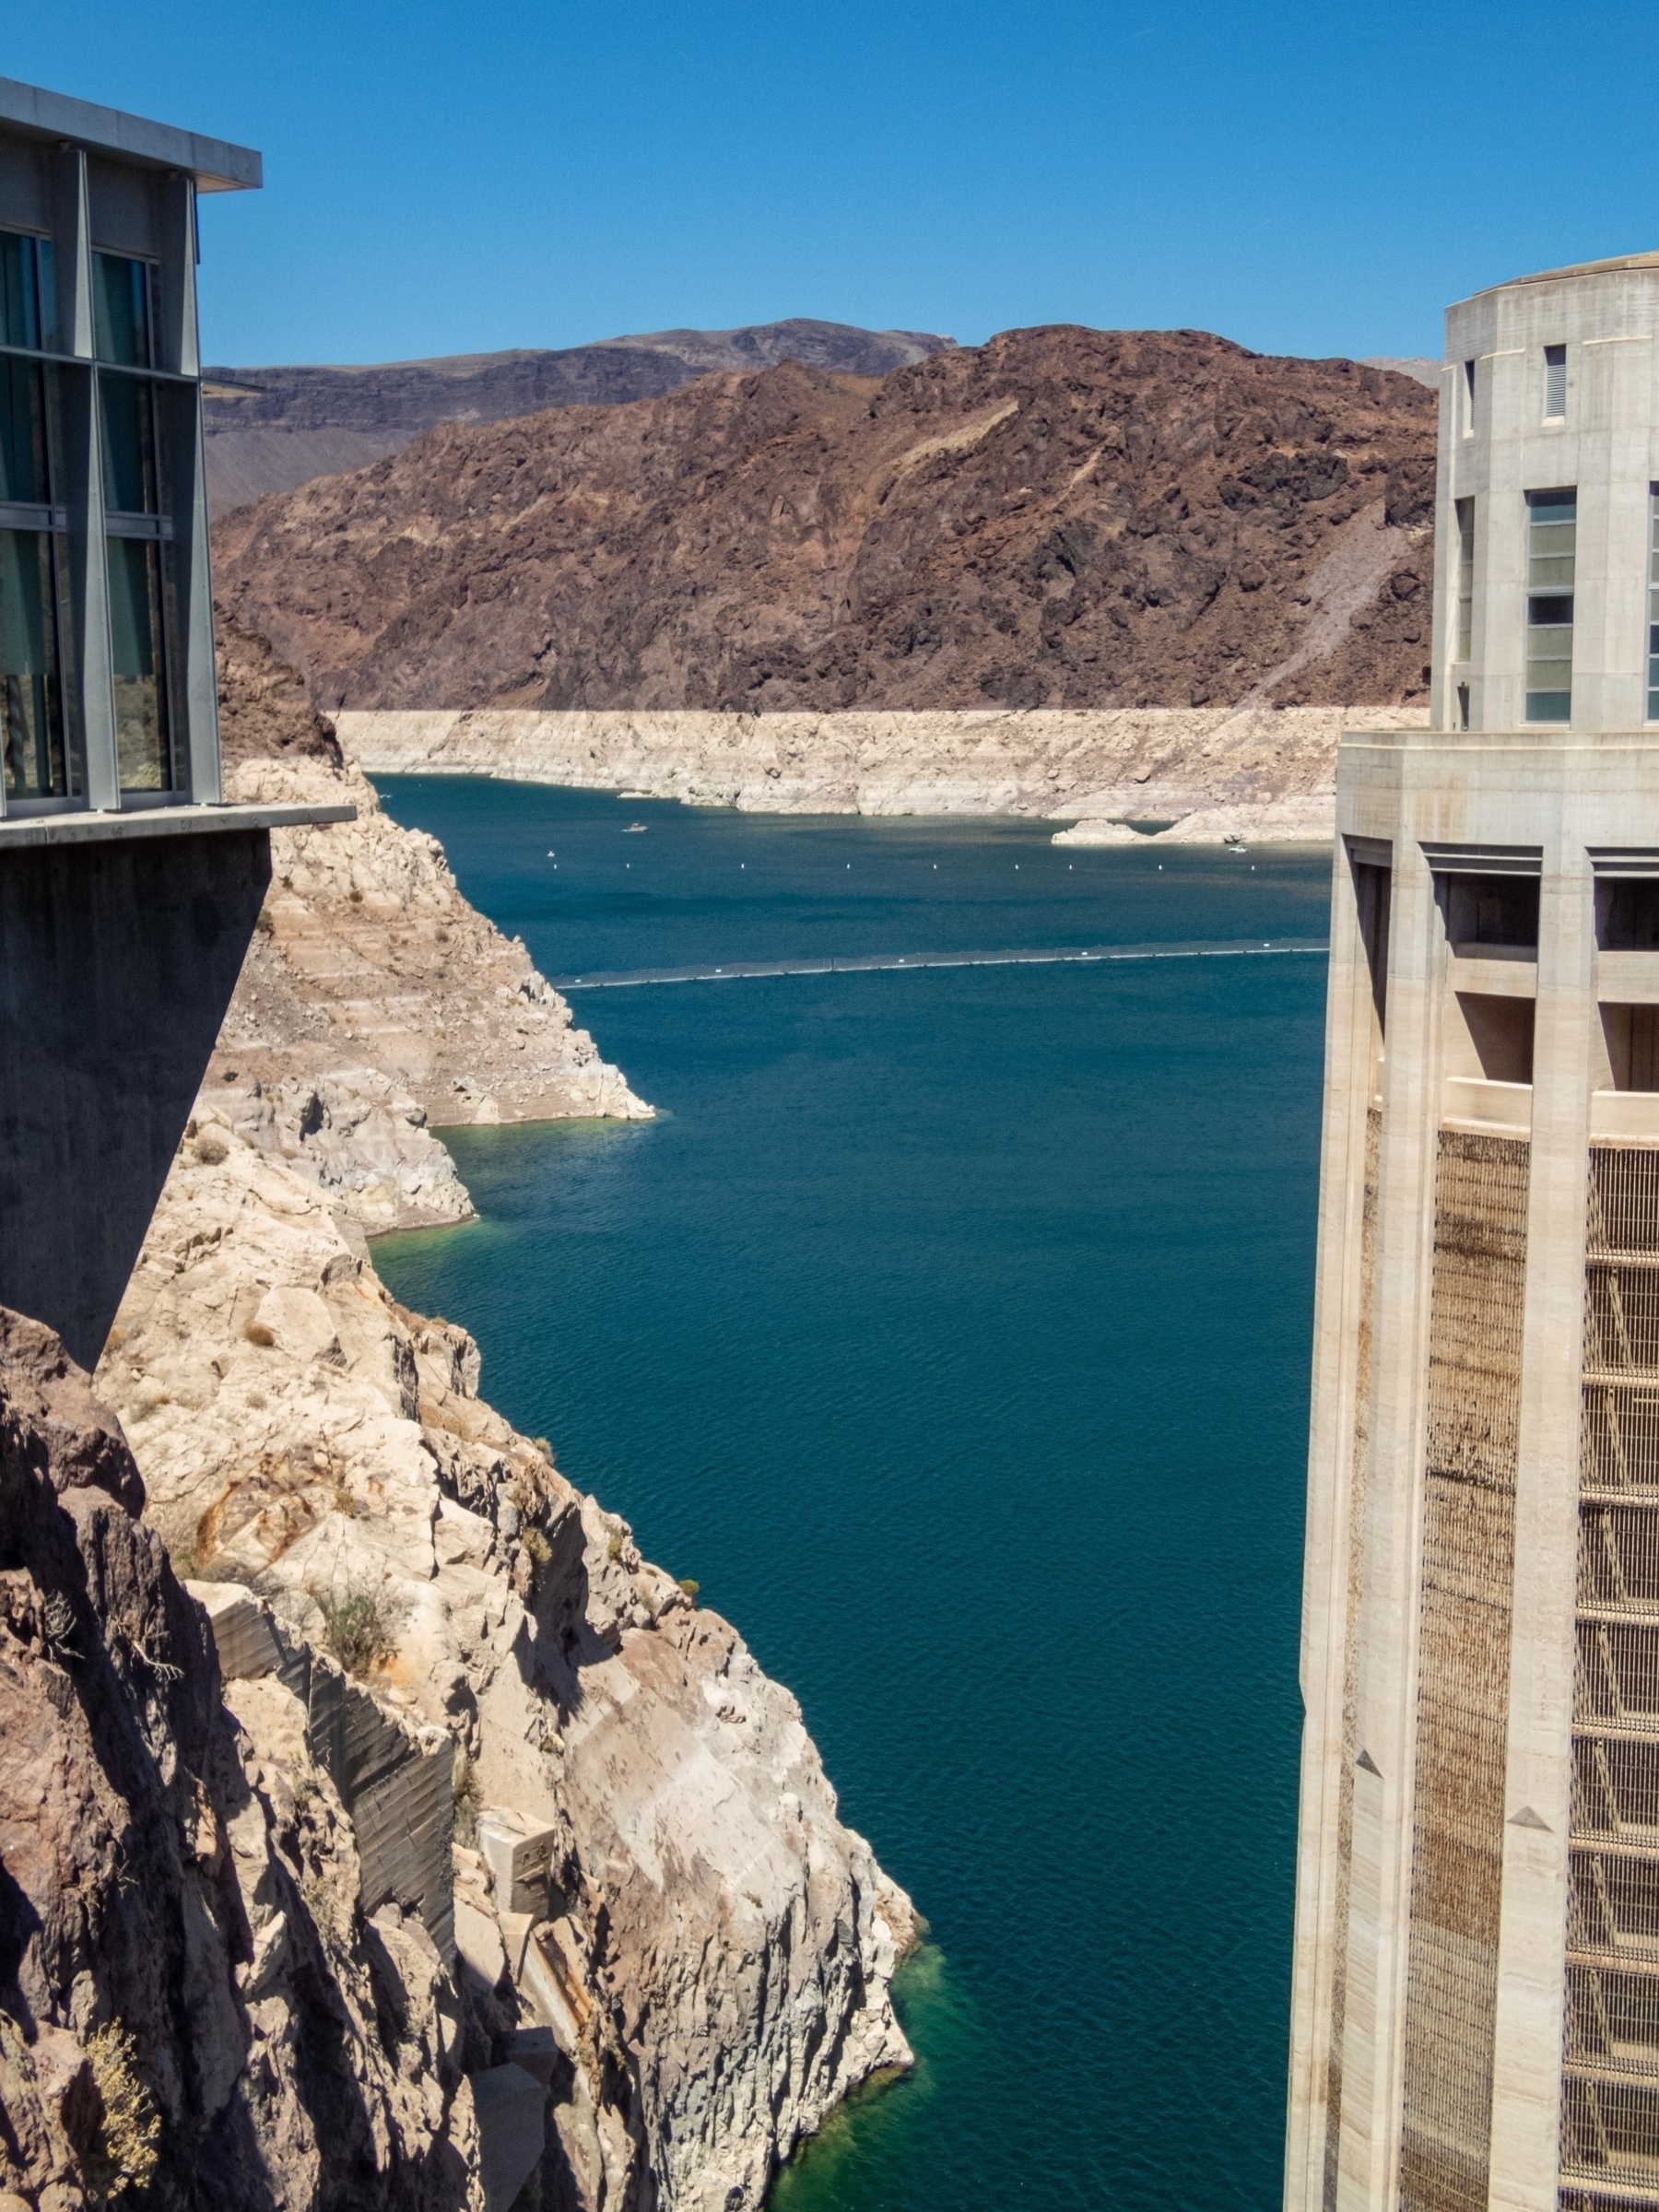 Lake Meade upstream of hoover dam with white bathtub ring